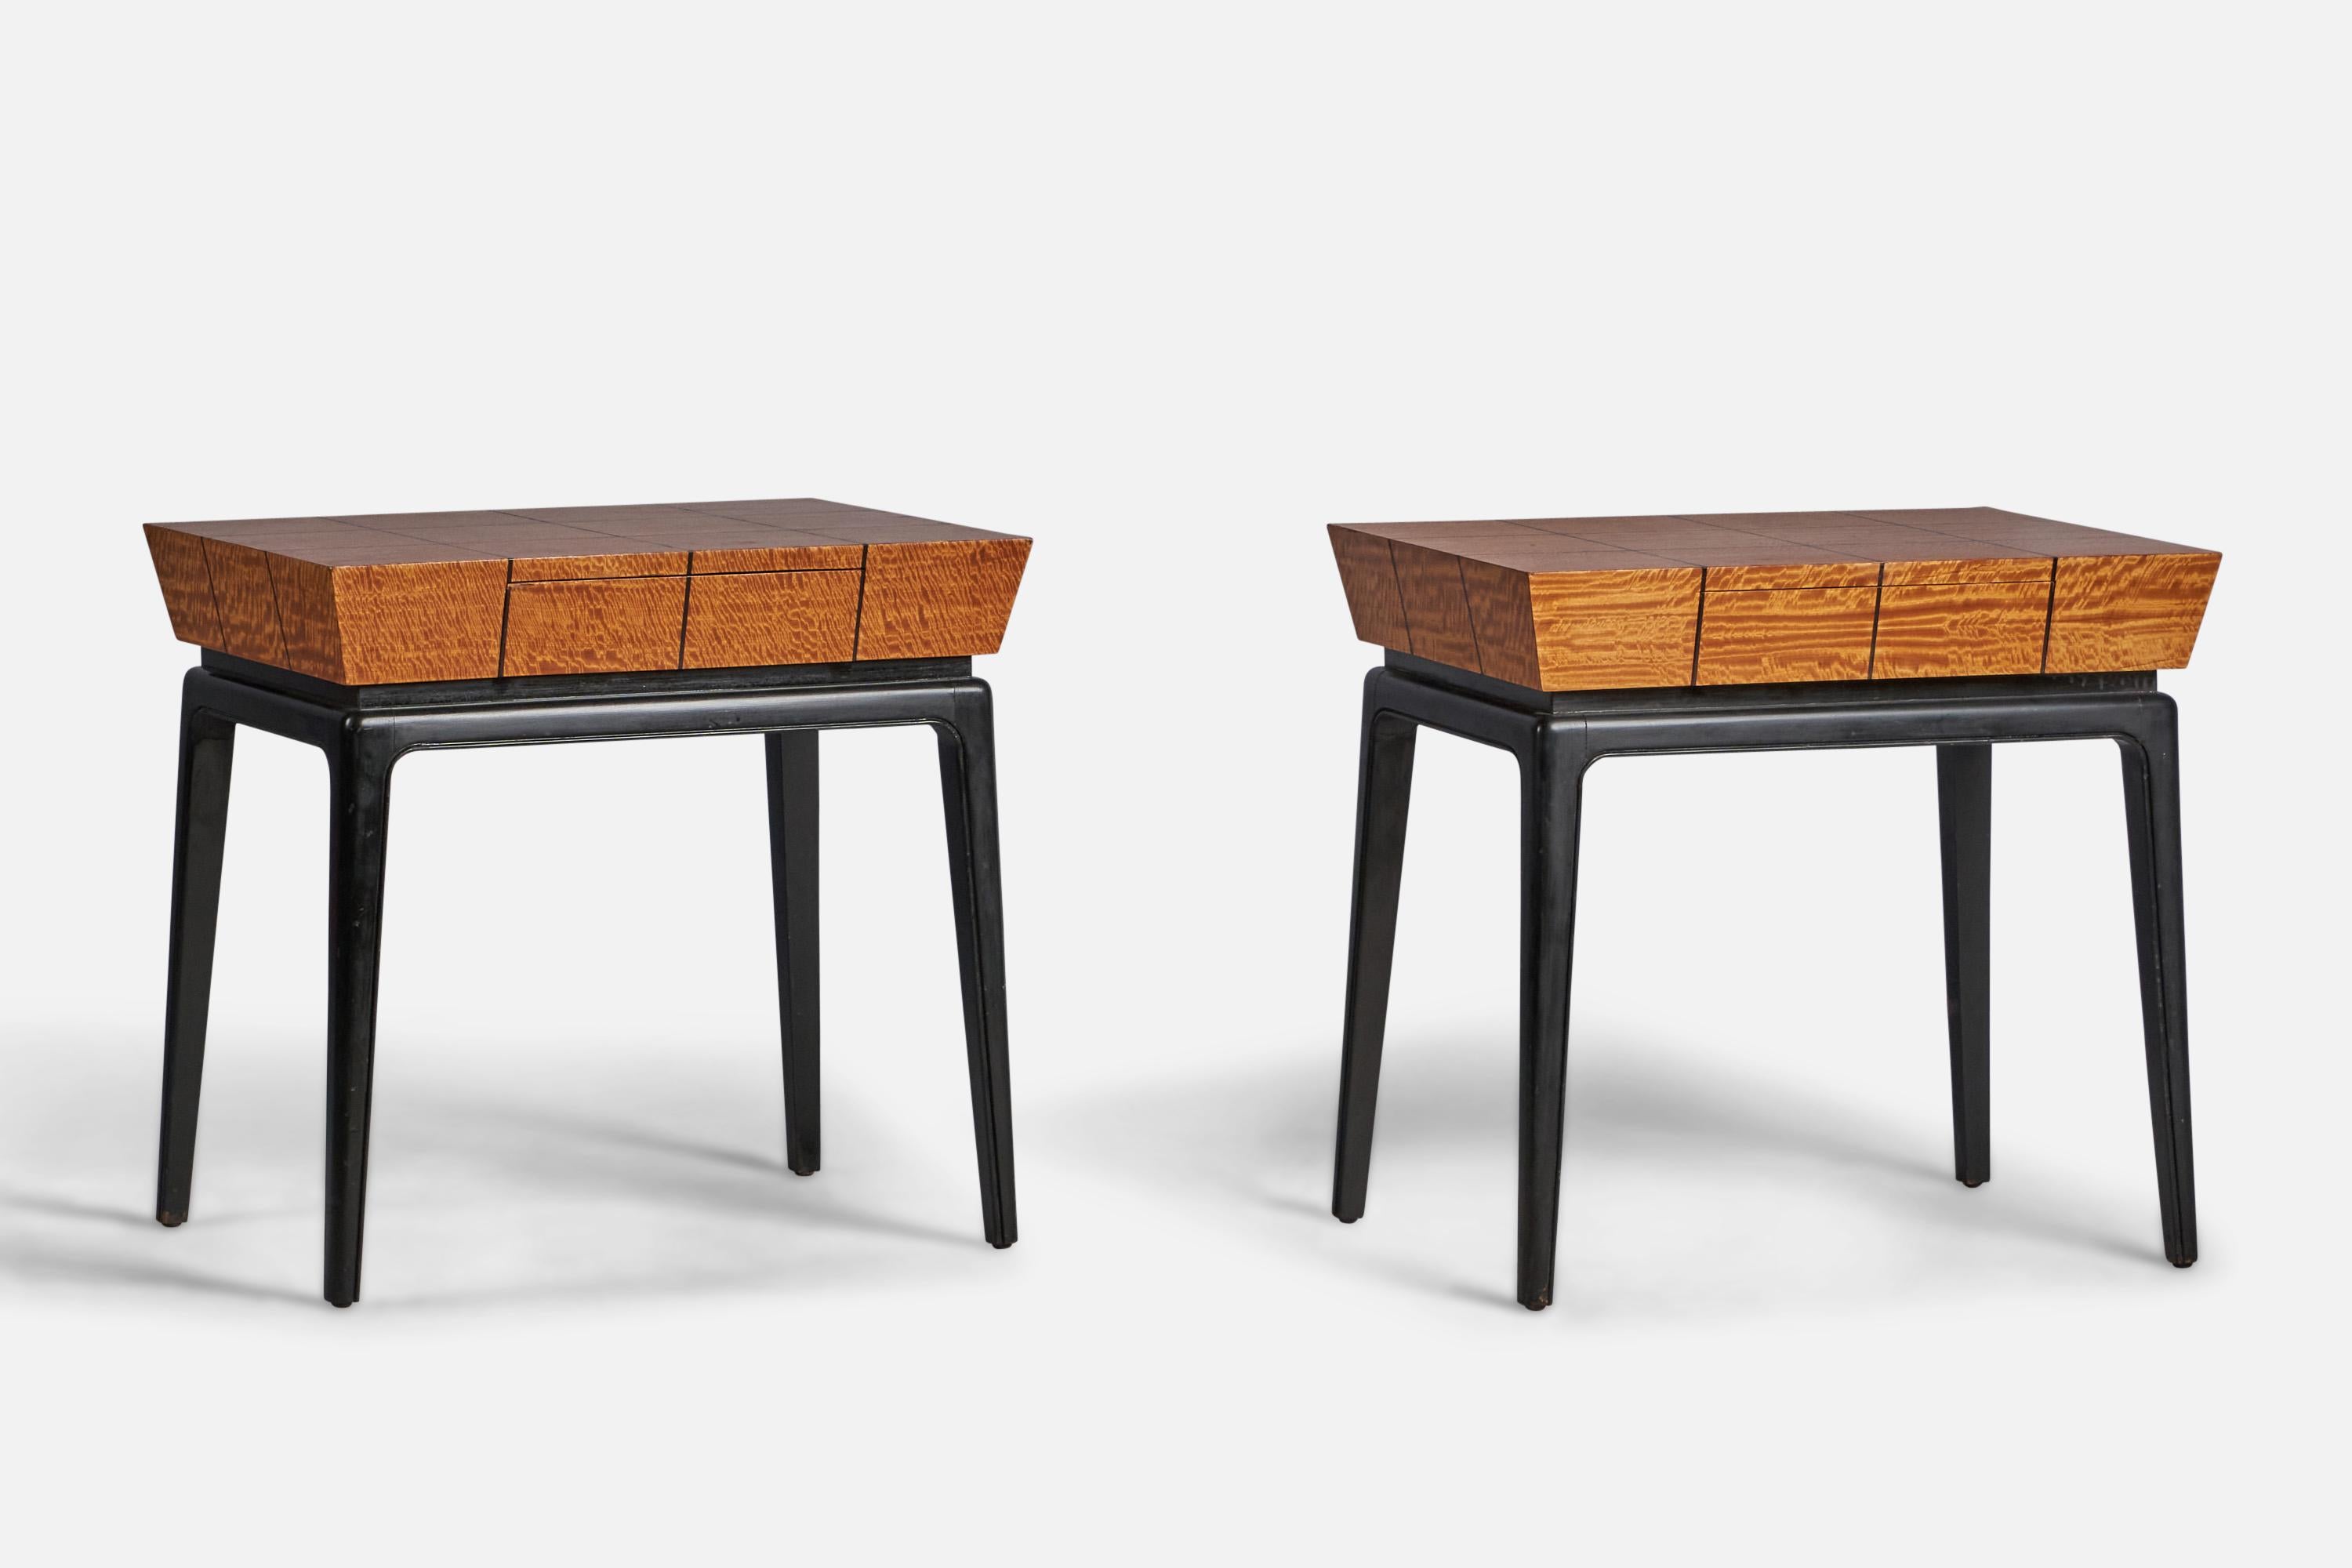 A pair of wood and black-lacquered wood side tables with drawers or nightstands designed and produced in the US, 1950s.

